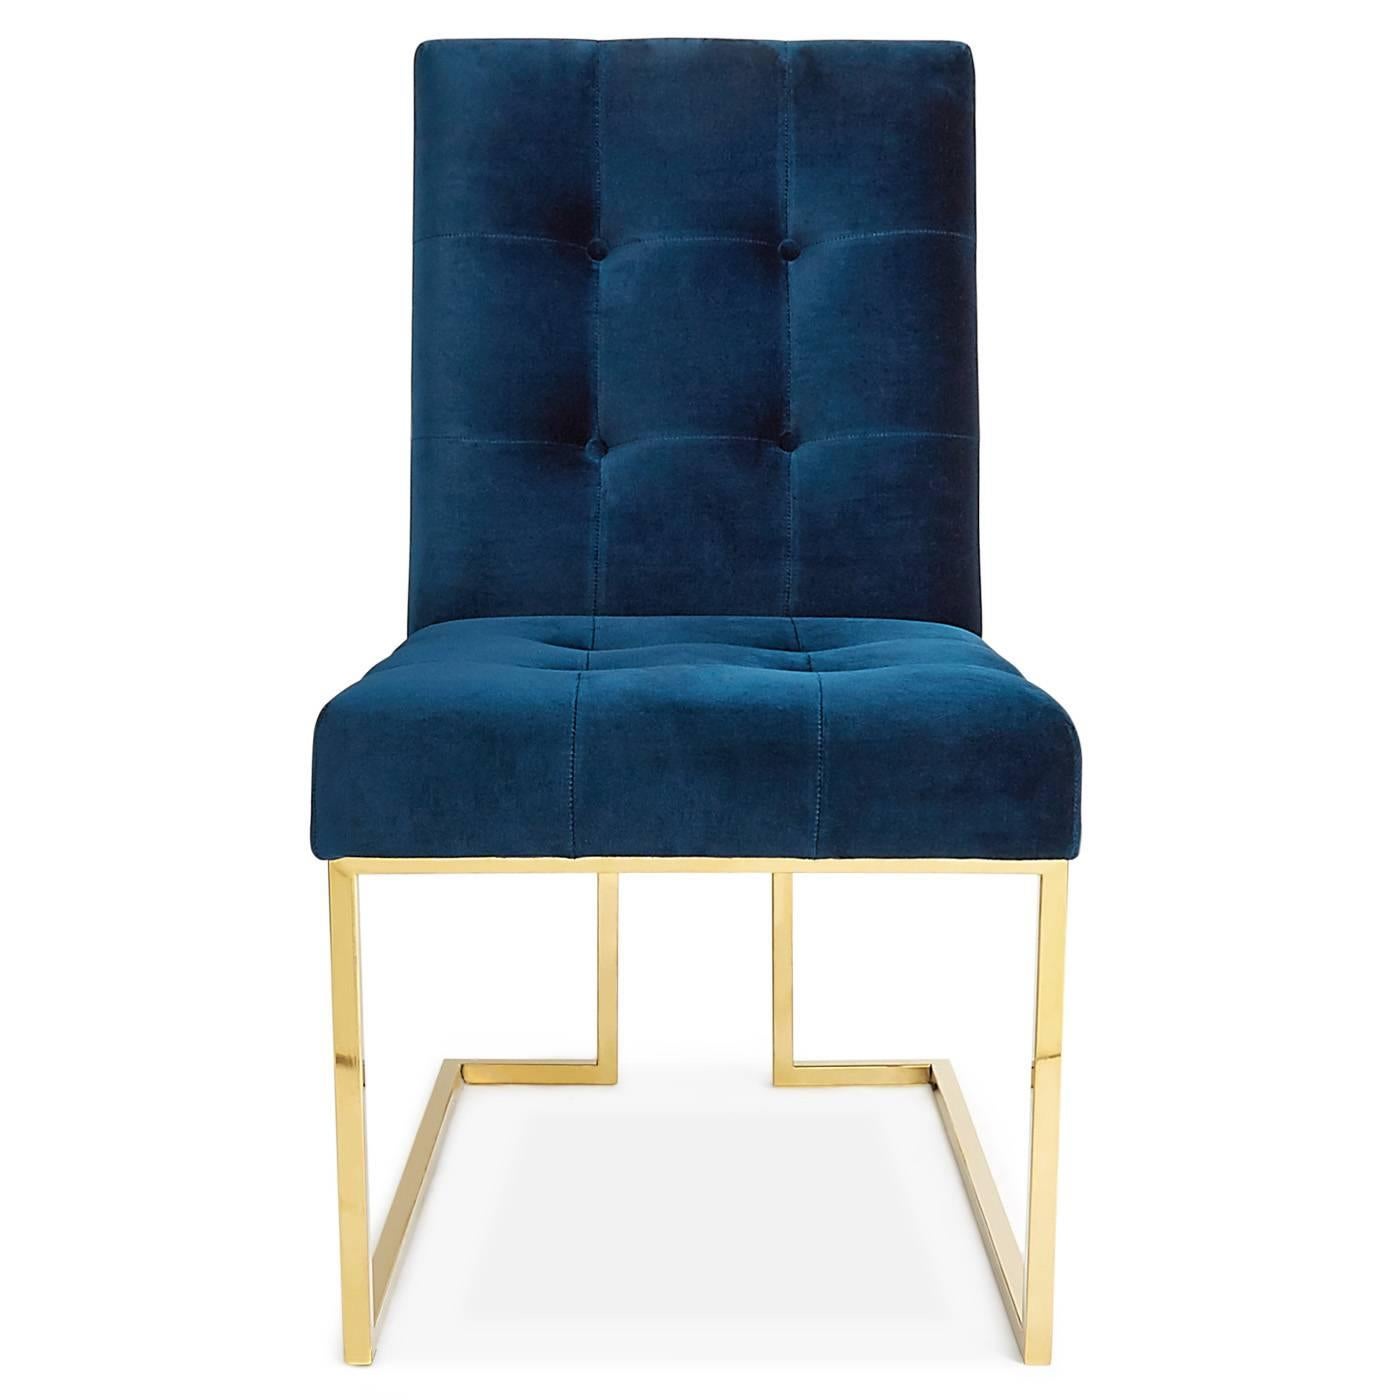 Minimalist comfort. Pared down geometry in polished brass meets Rialto navy velvet in our Goldfinger collection. A little bit, 1970s, a lot today. Goldfinger is the winning ticket that adds modernist rigor to your Park Ave pad or swanks up your